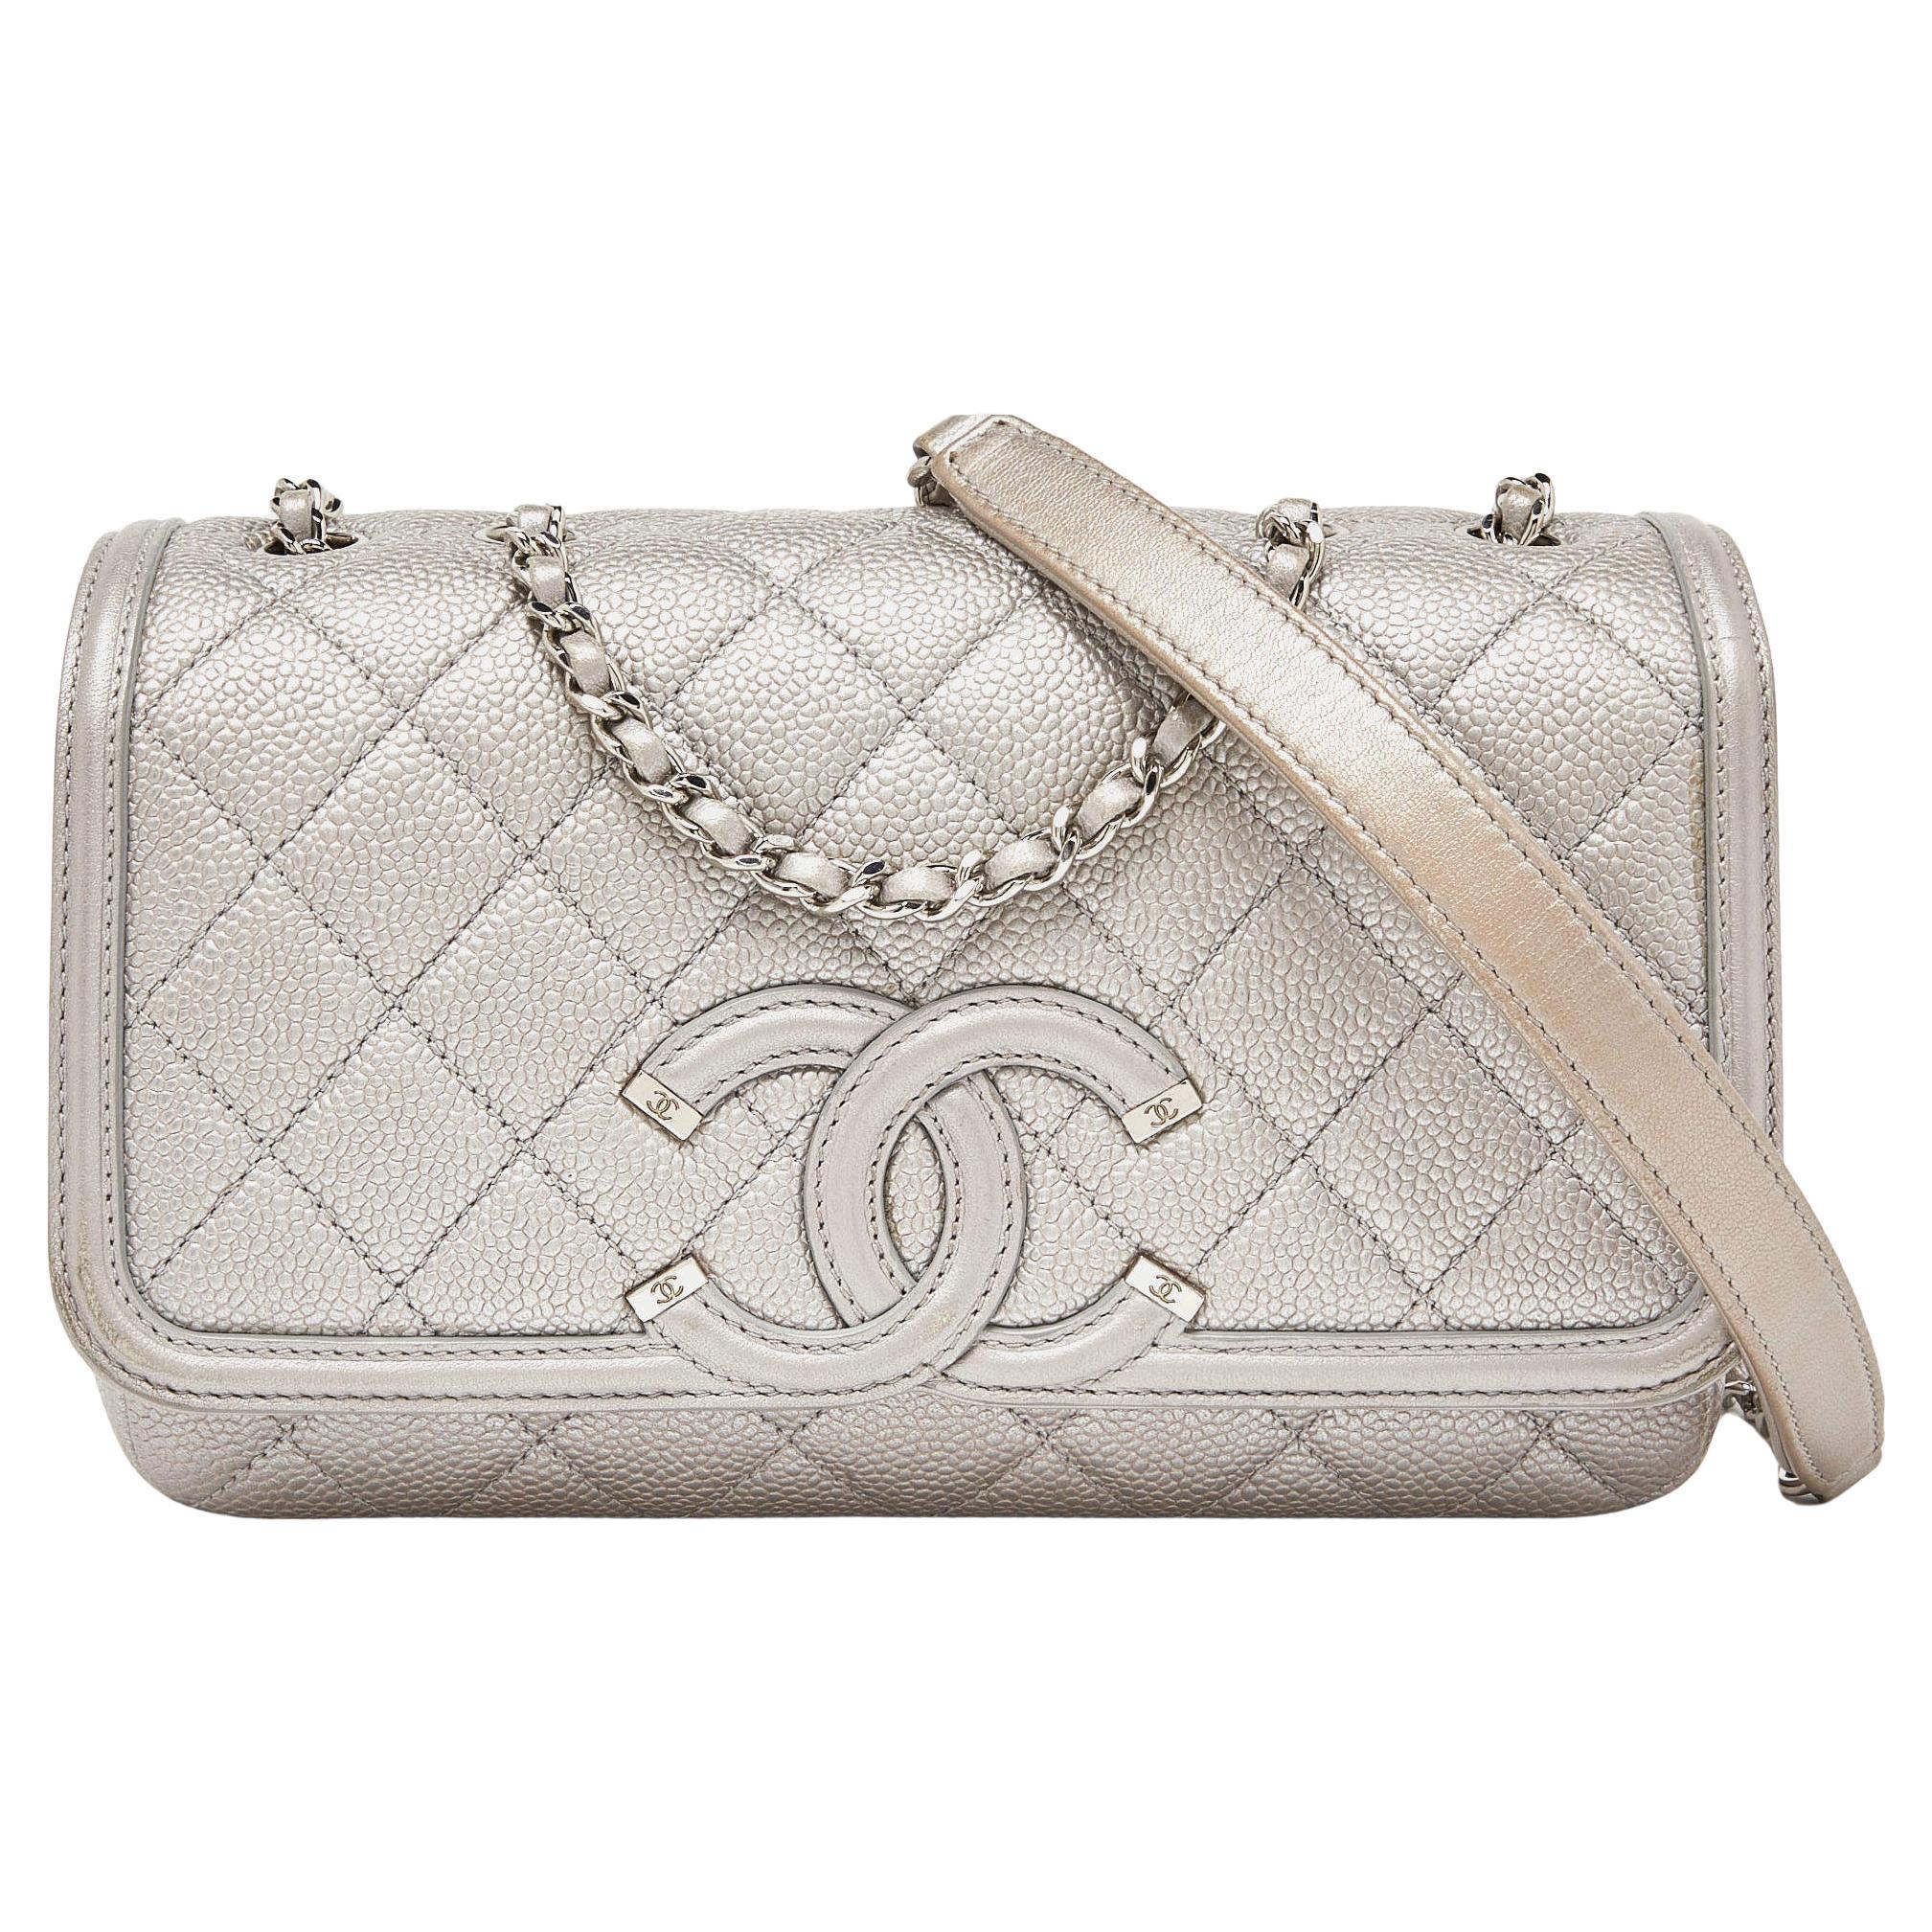 Chanel Silver Quilted Caviar Leather Small CC Filigree Flap Bag